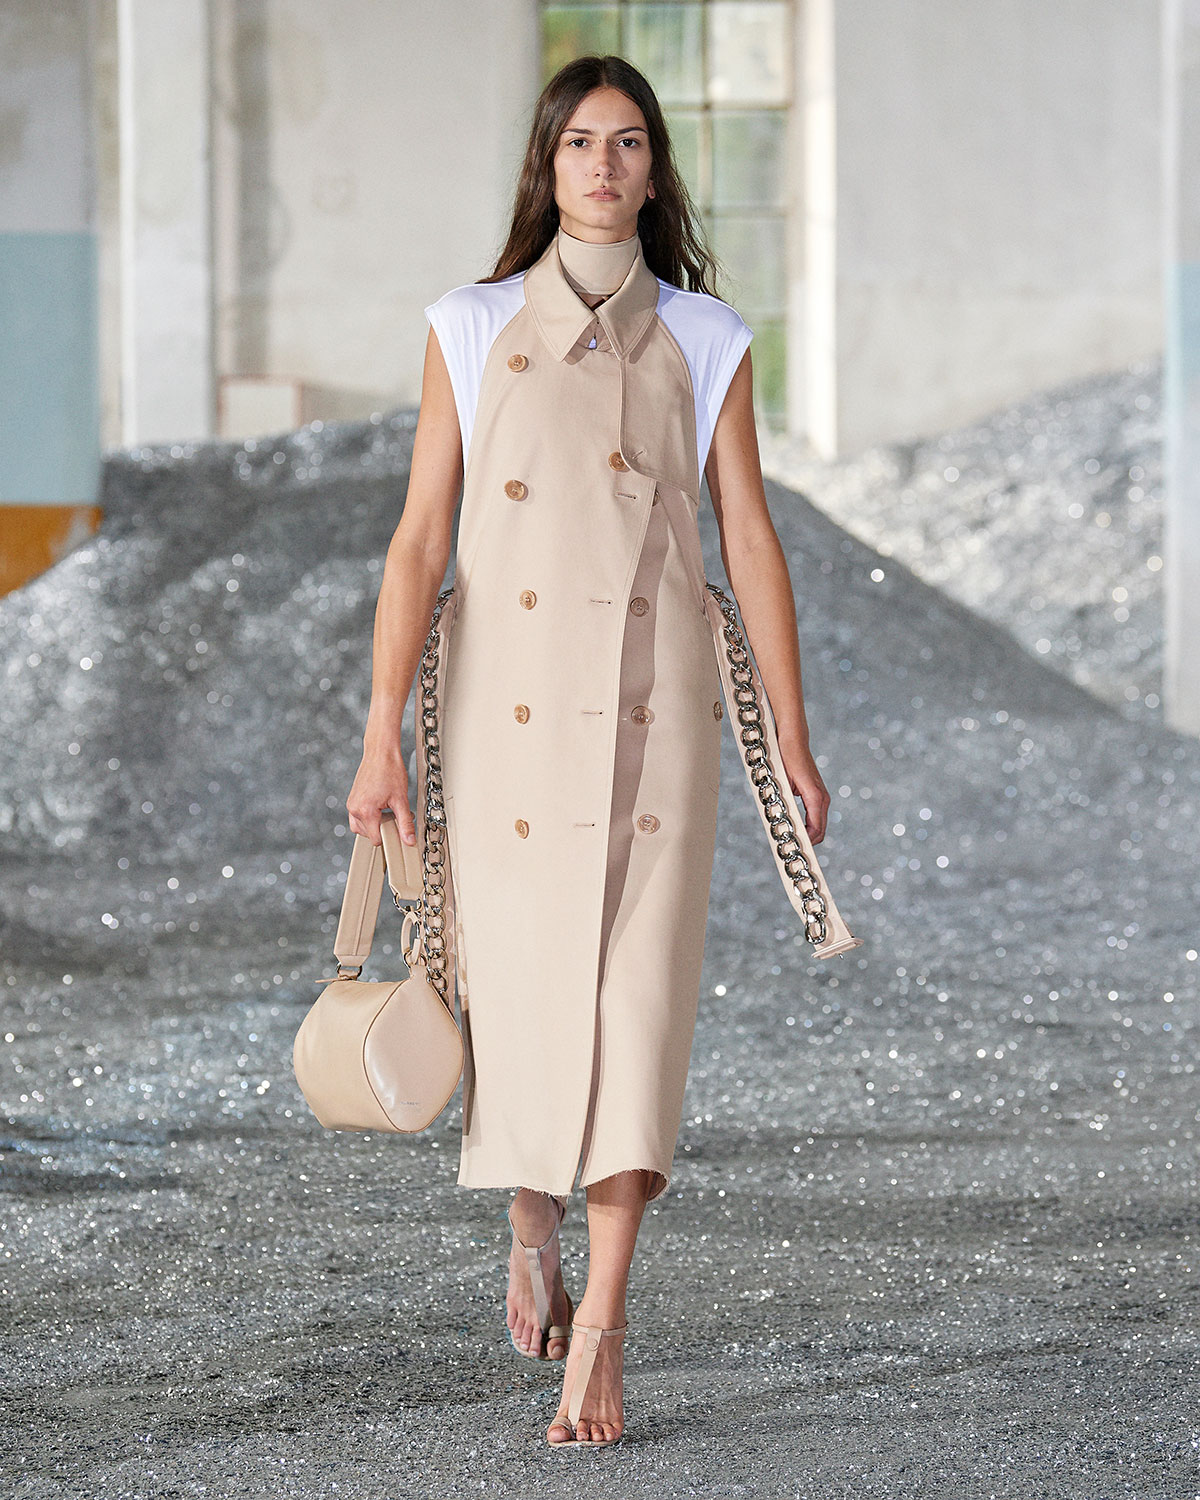 Burberry Spring Summer 2022 Collection | The Fashionography